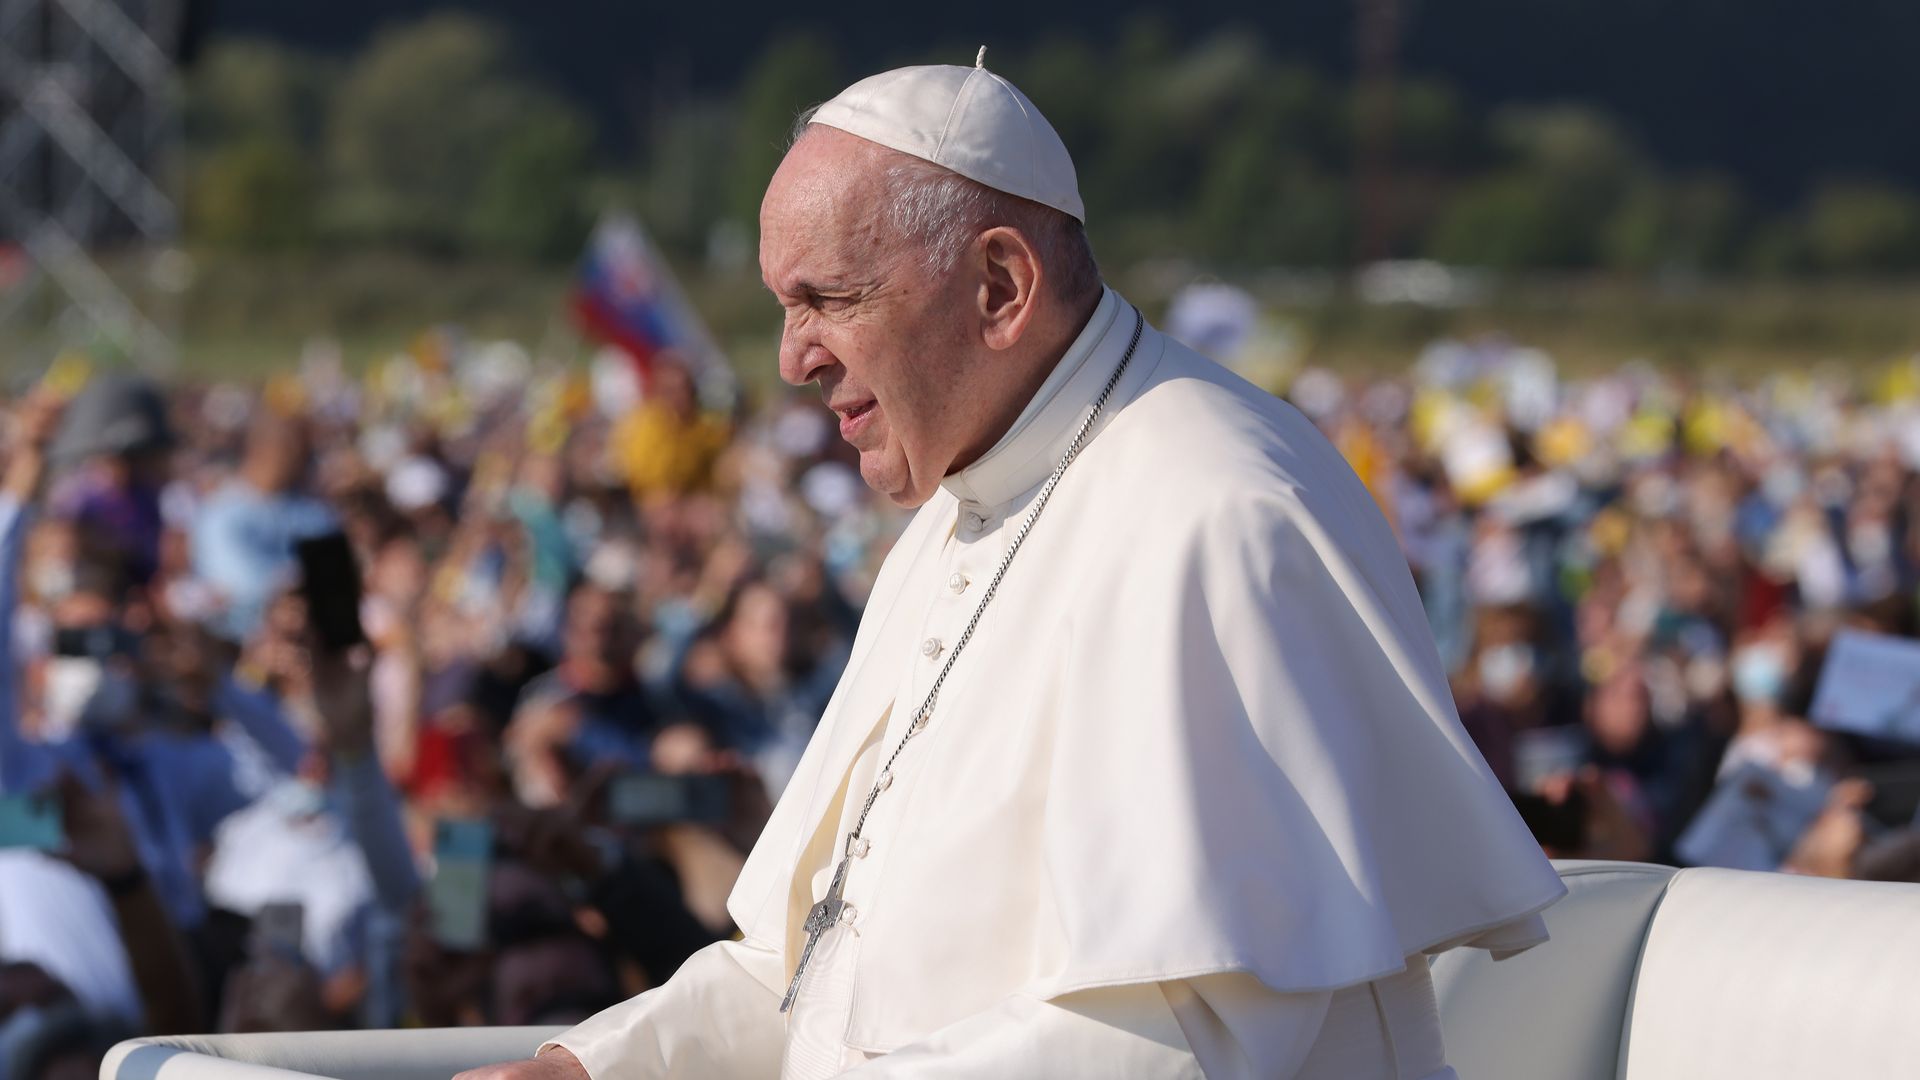 Pope Francis rides his Pope mobile through a crowd of pilgrims before holding an open-air mass on September 15, 2021 in Sastin, Slovakia